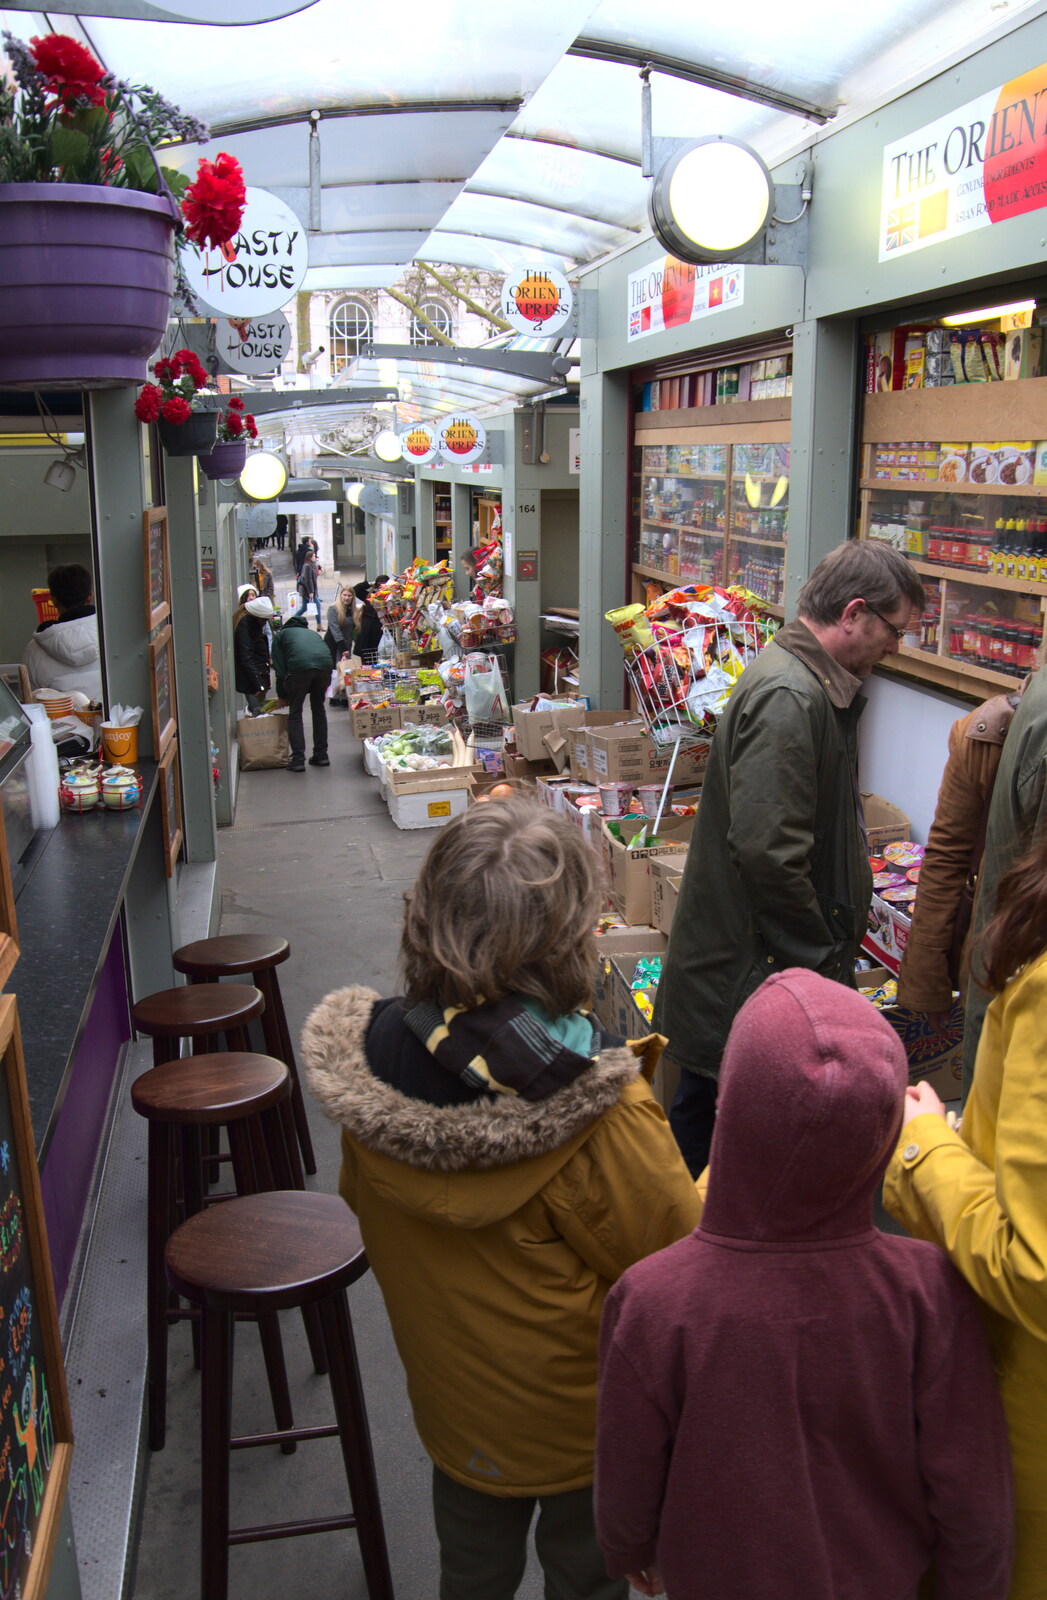 We're in Norwich Market from A Trip to Cooke's Music, St. Benedict's Street, Norwich - 14th March 2020